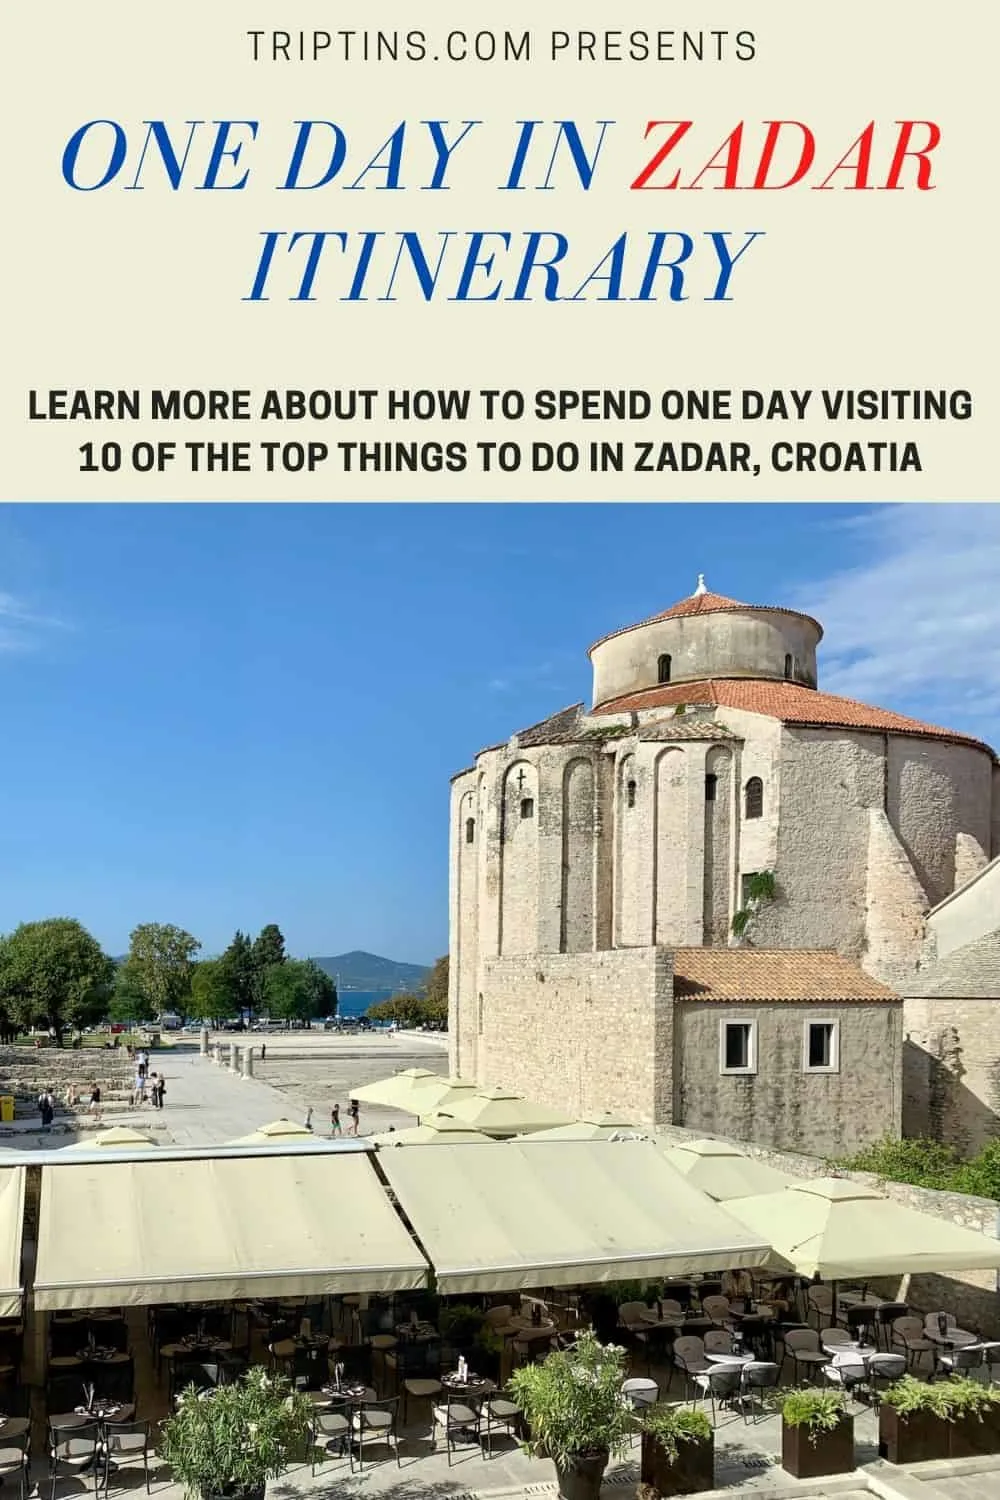 One Day in Zadar Itinerary